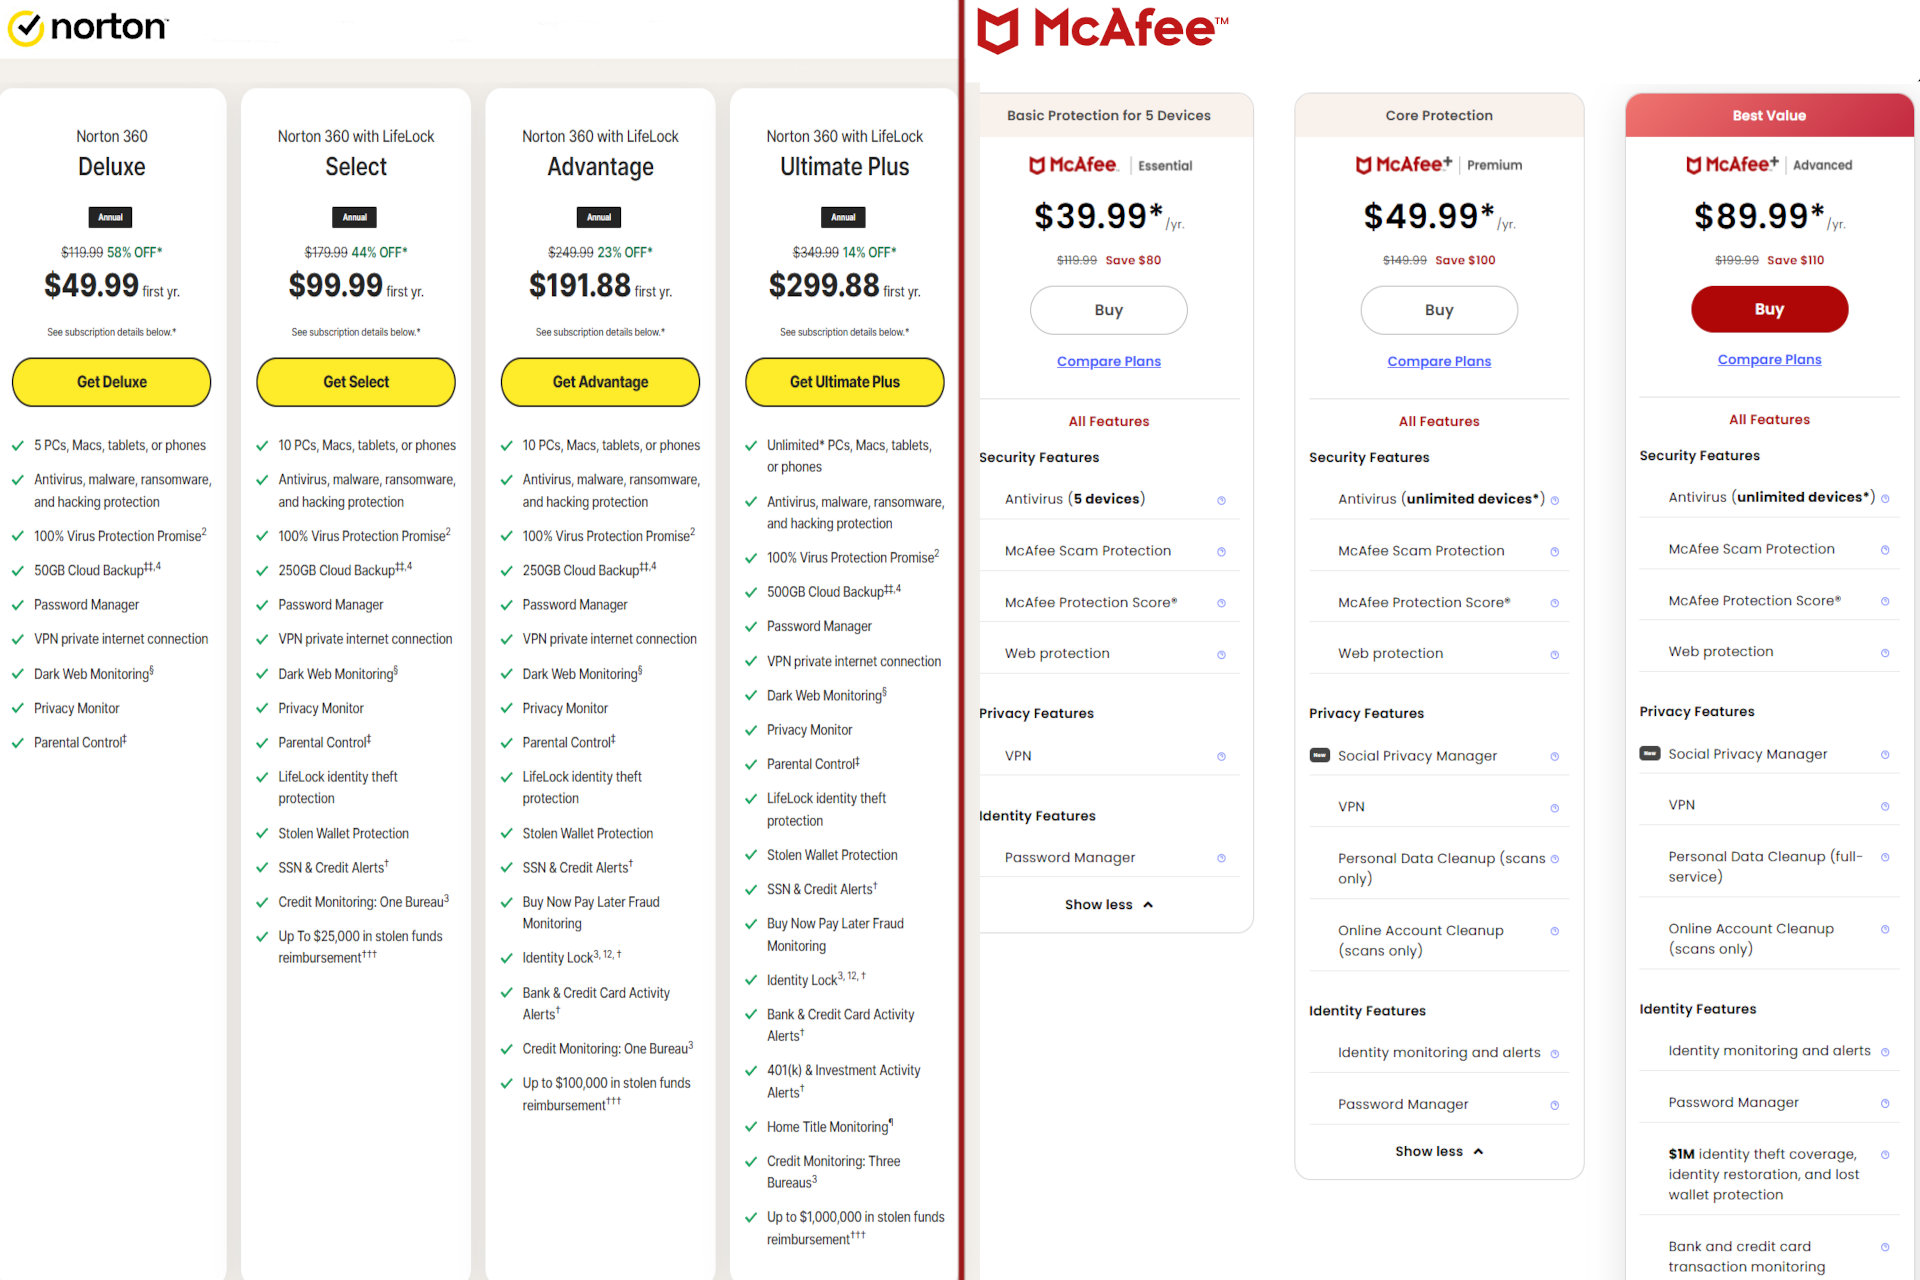 Norton and McAfee antivirus price lists appear side-by-side.